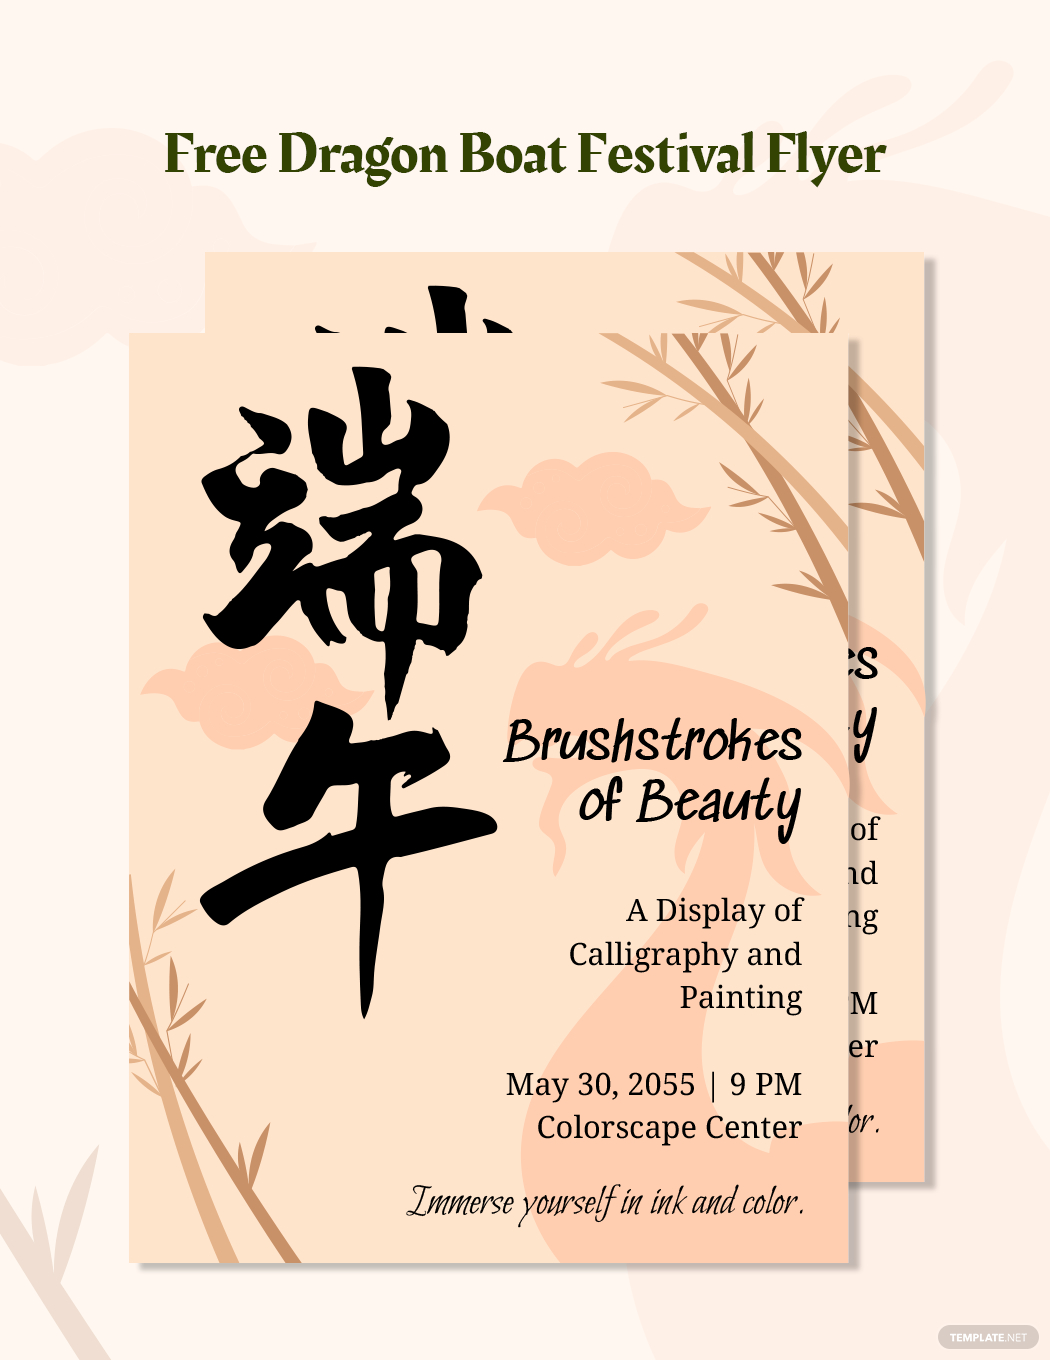 dragon boat festival flyer ideas and examples